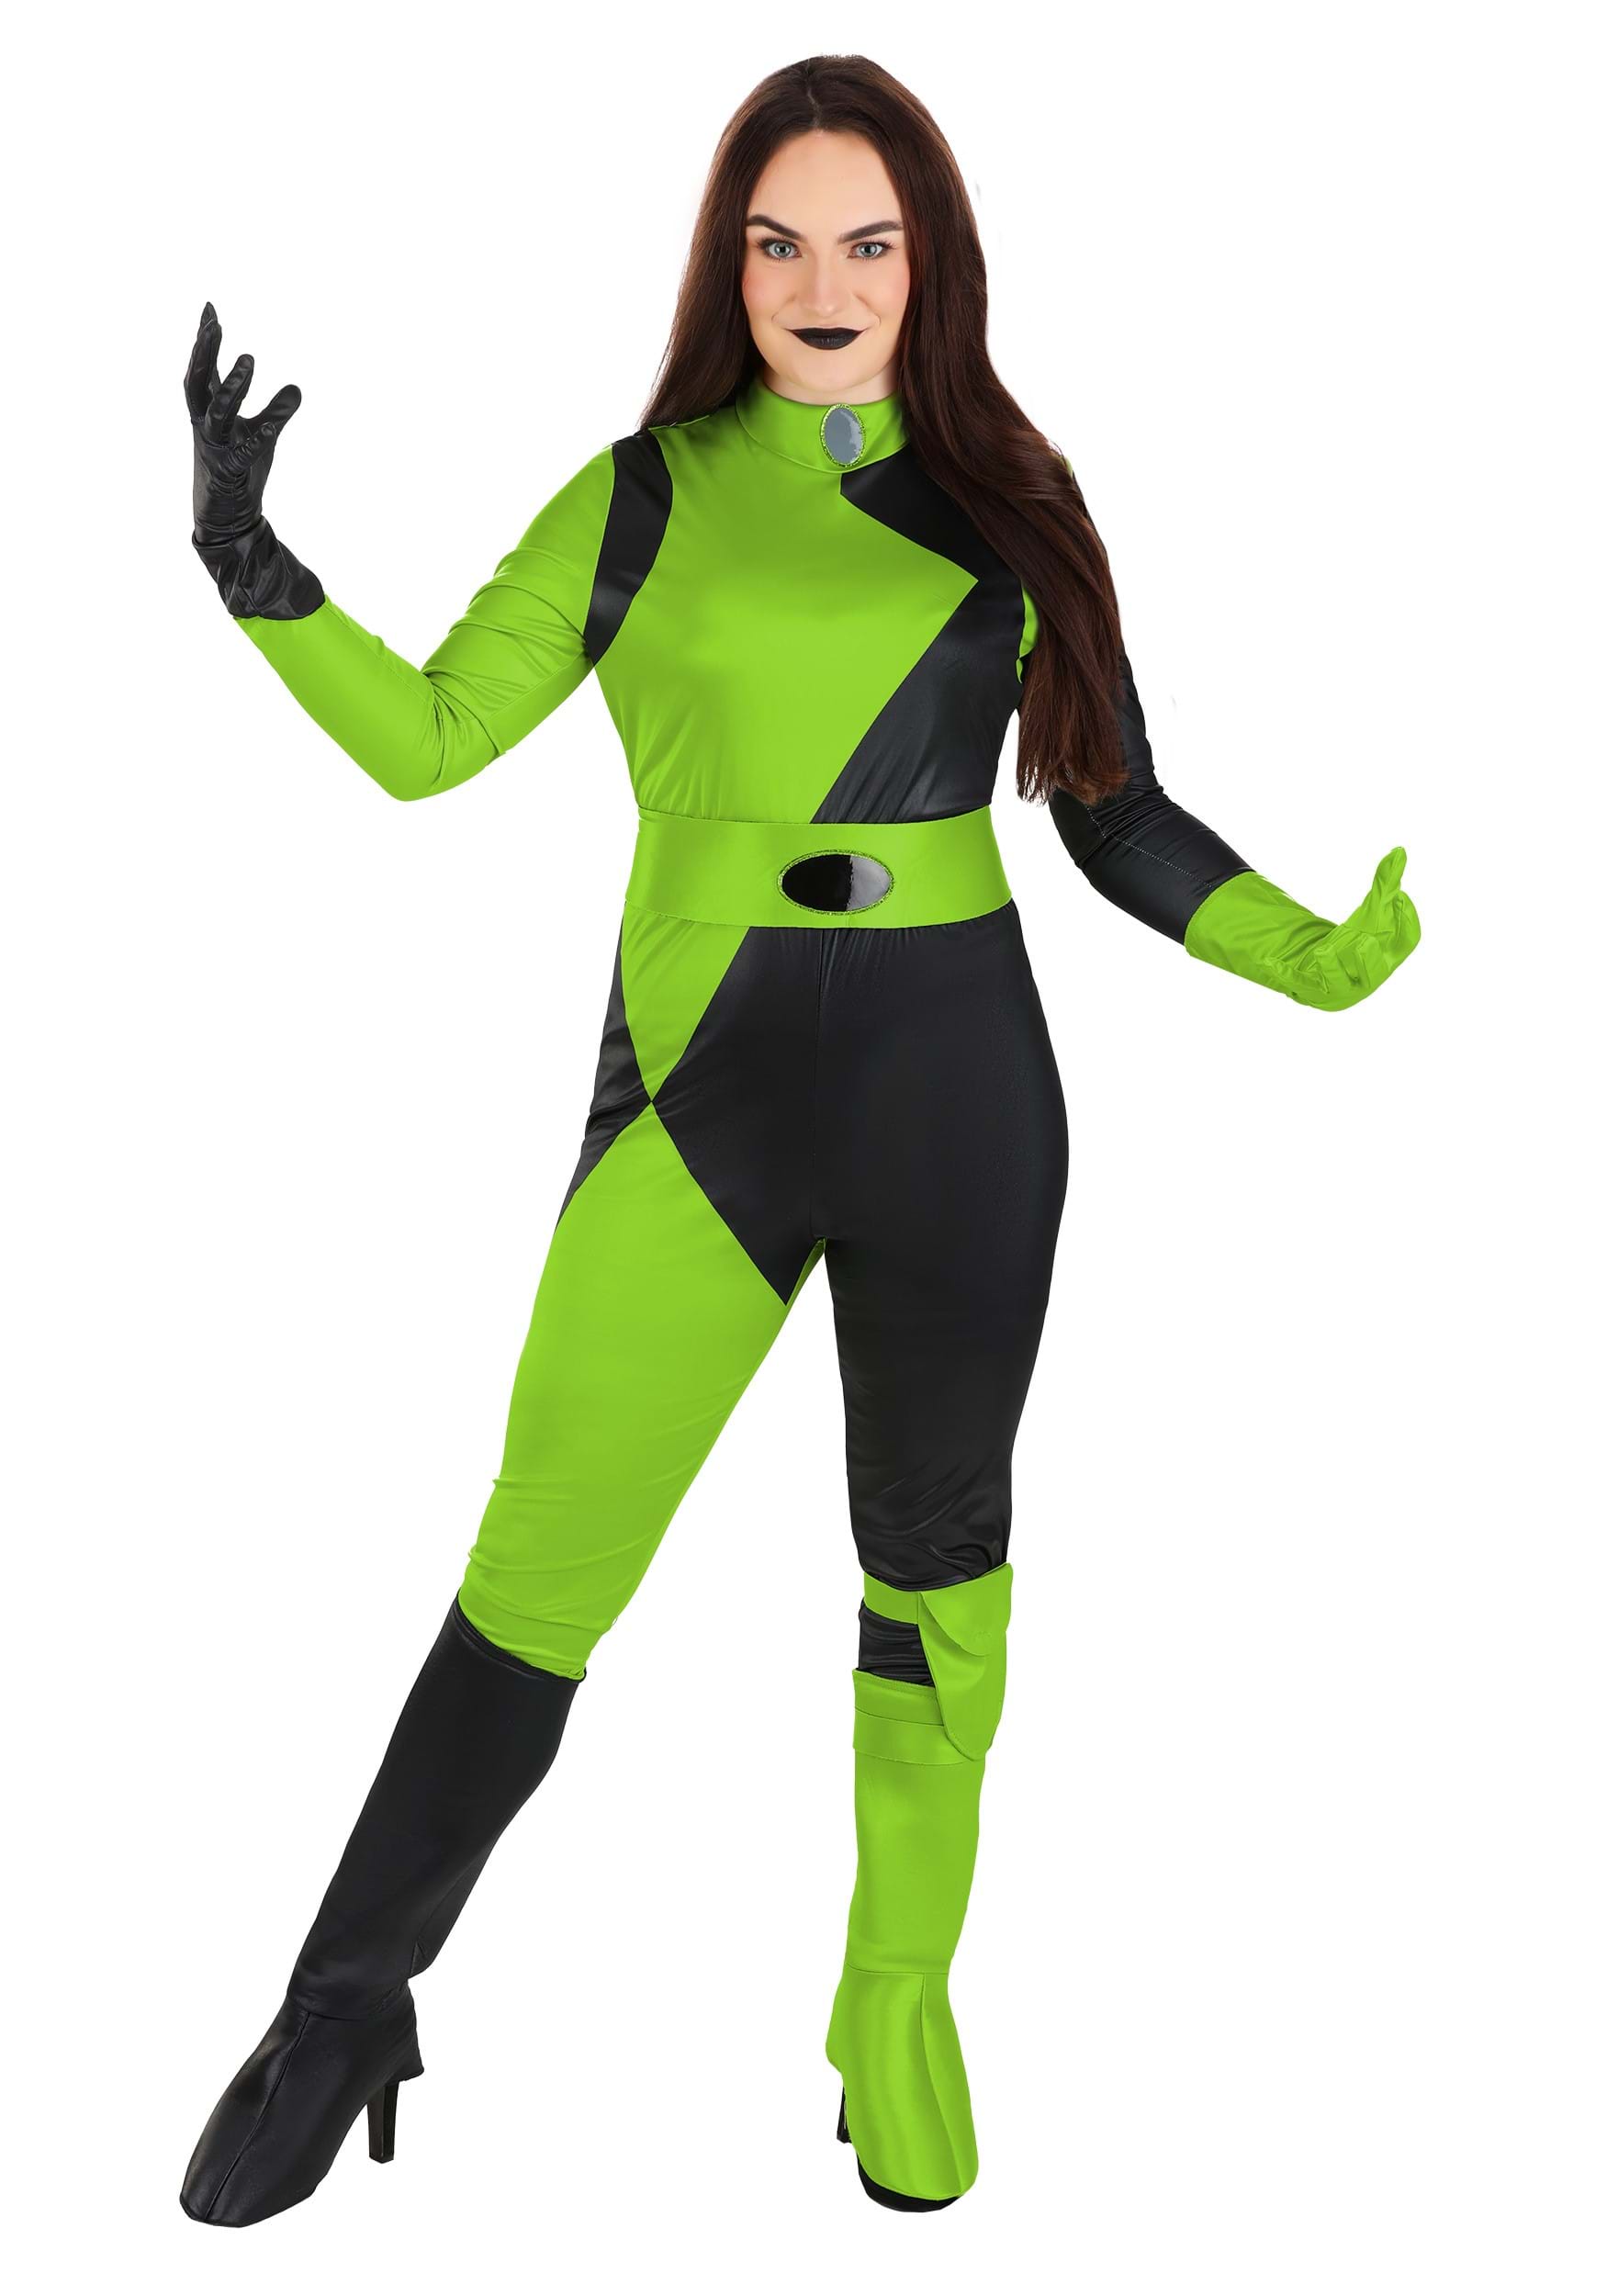 Kim Possible Animated Series Shego Fancy Dress Costume For Women